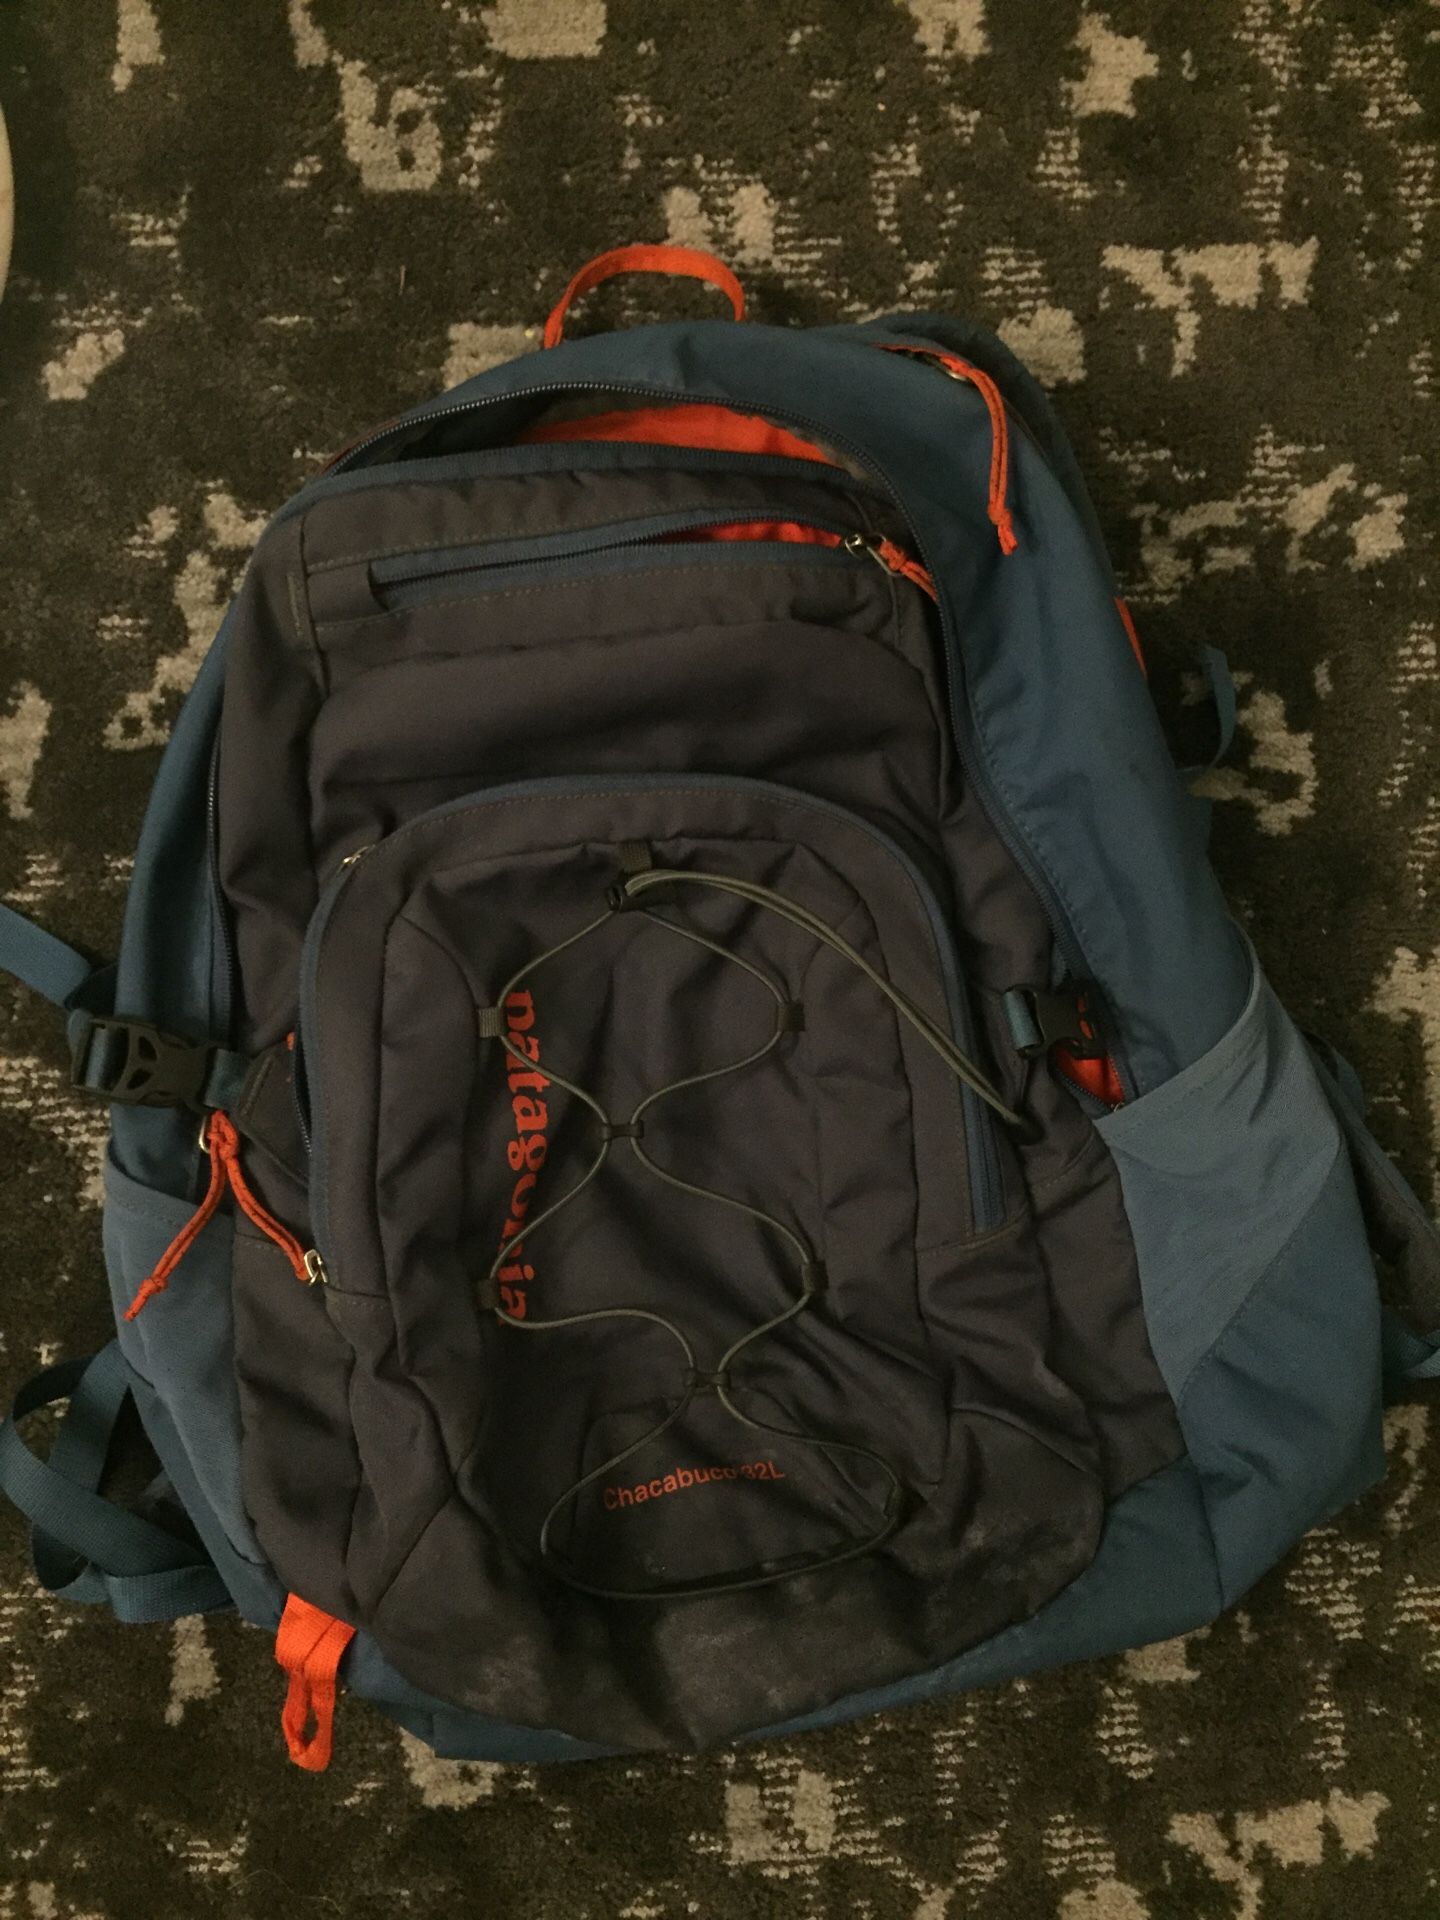 Patagonia 32L Chacabuco Backpack